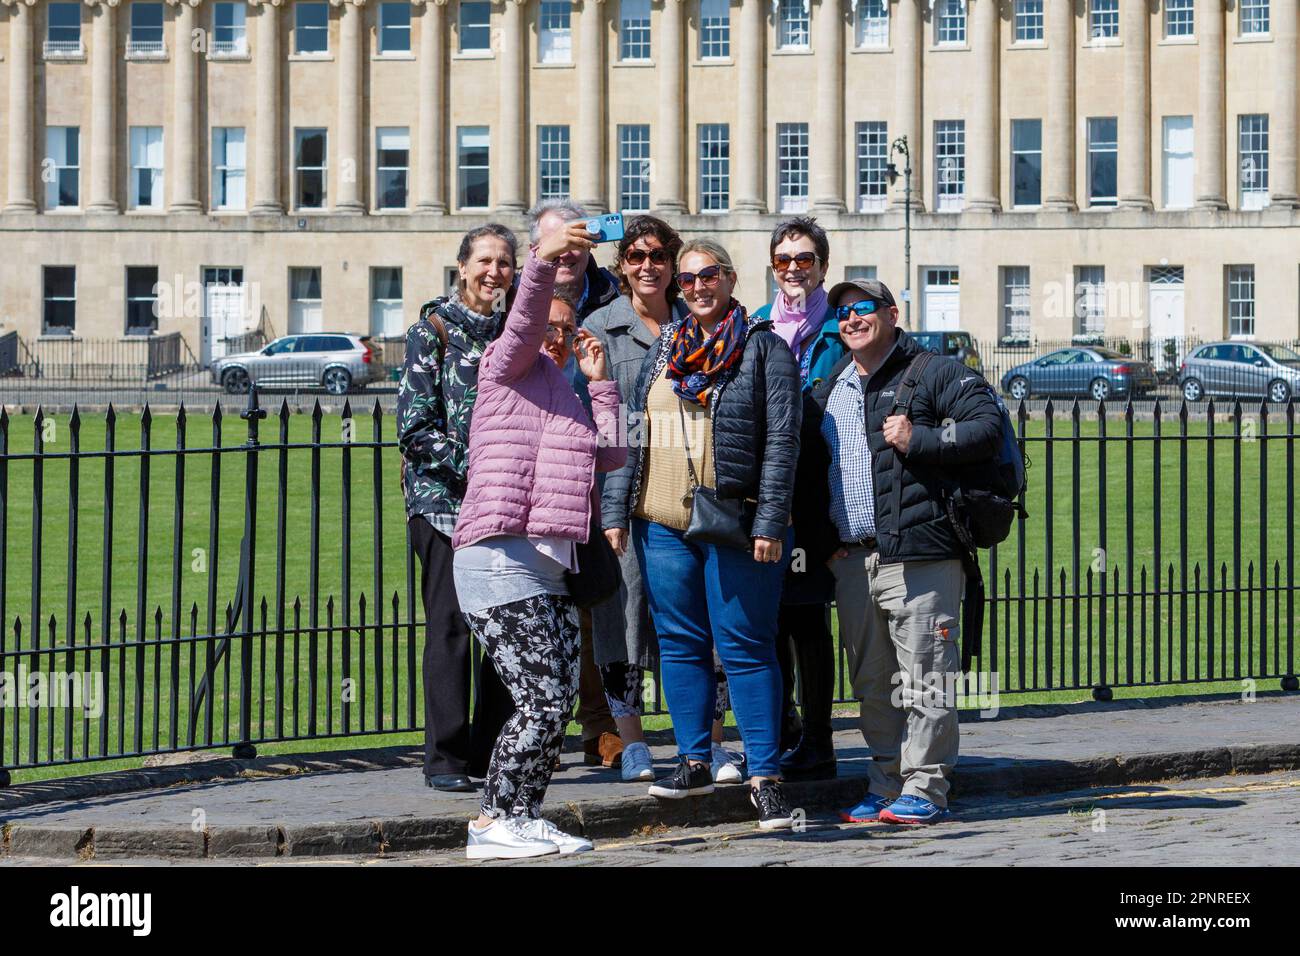 Bath, UK. 20th April, 2023. With forecasters predicting that cooler and more overcast weather is to come in the next few days, tourists are pictured as they take a group selfie in front of Bath's famous Royal Crescent. Credit: Lynchpics/Alamy Live News Stock Photo